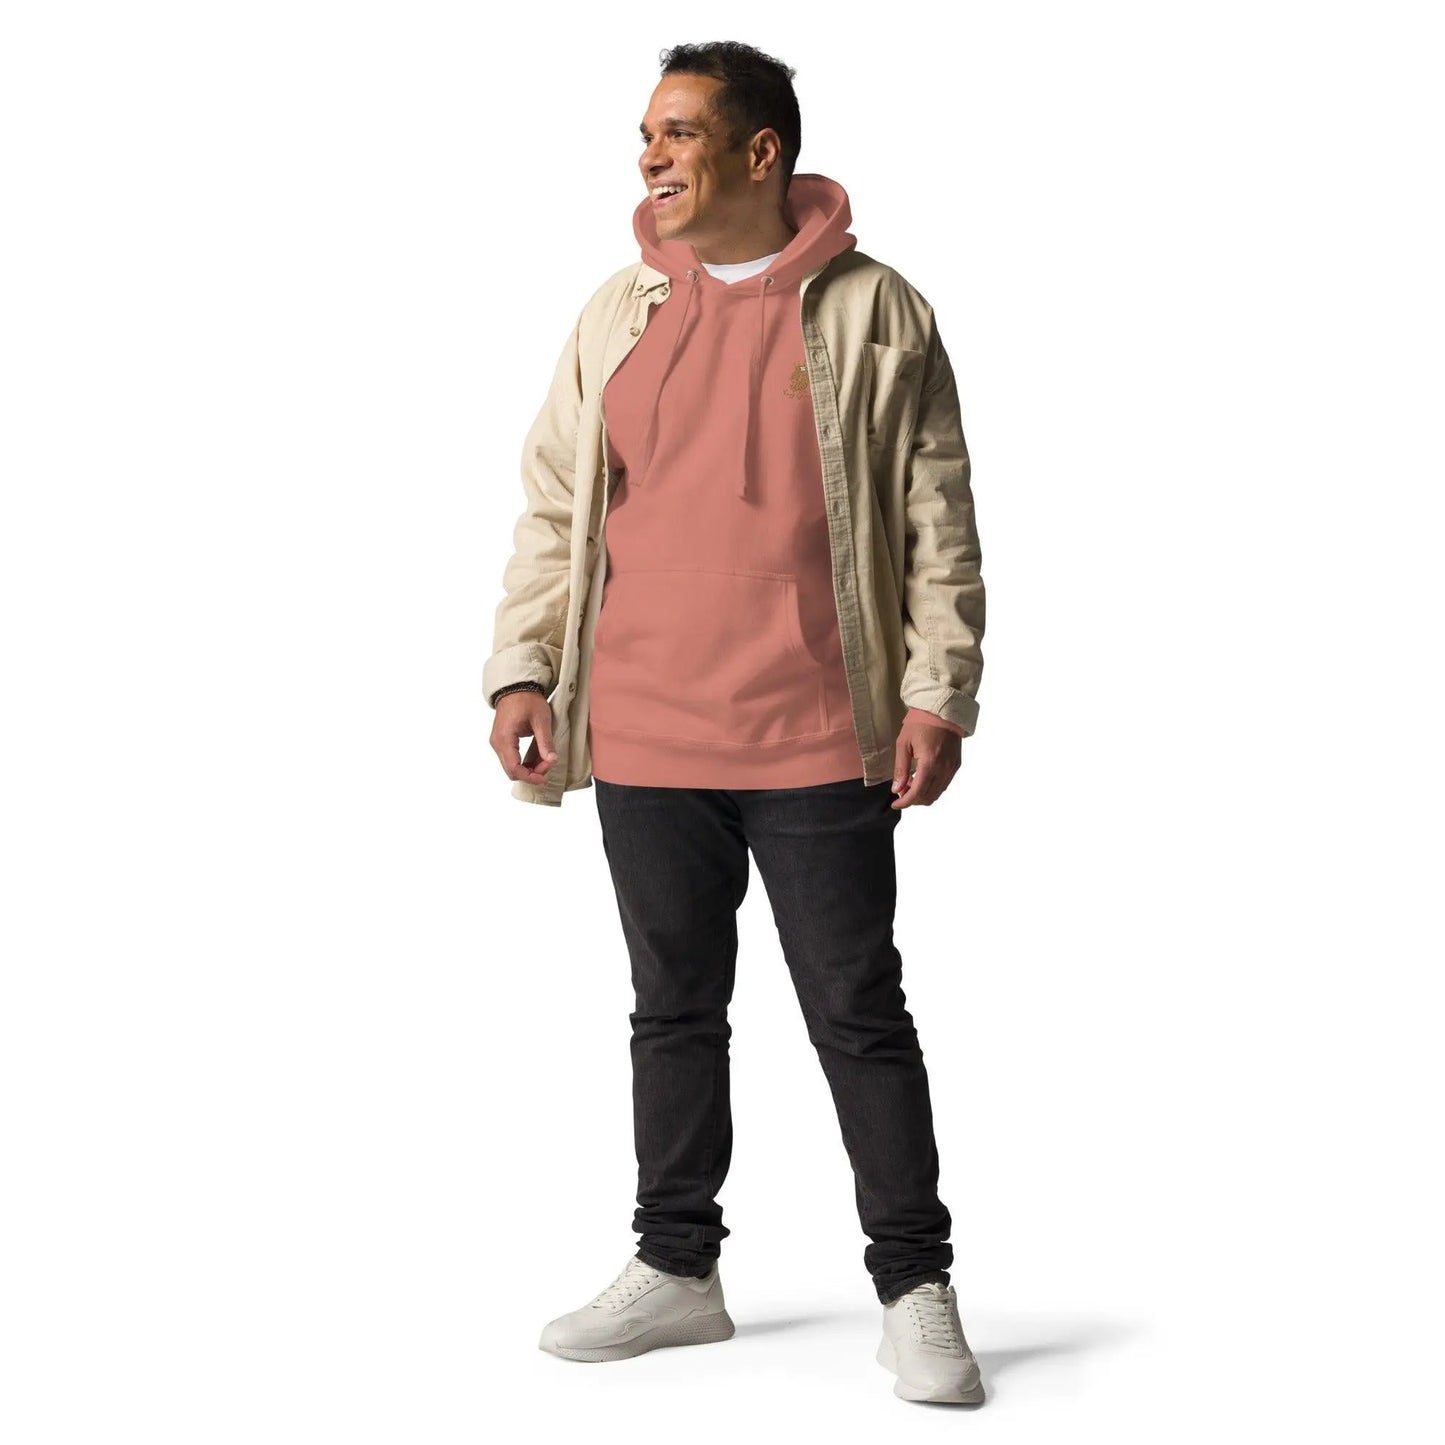 Men's Fashion Hoodies: Crafted with comfort and style - men's graphic t-shirts, Men's Shorts, Men's swim trunks, Men's Joggers, womens crop tee, womens crop top, Women's Hoodies, High Waisted Bikini, String Bikini Swimwear Sets, mens sweatpants, mens underwear, womens dresses, mens high top canvas shoes, men slides, Athletic Women Shoes, Women's canvas shoes, reversible bucket hat, best travel backpack -  Urban Style